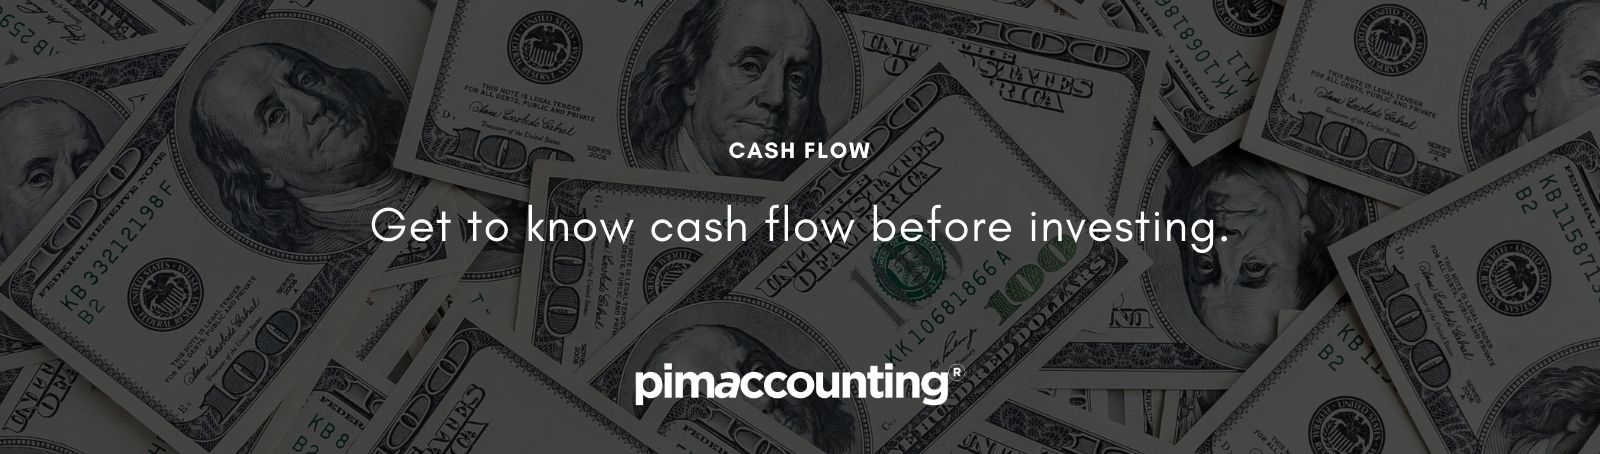 Get to know cash flow before investing